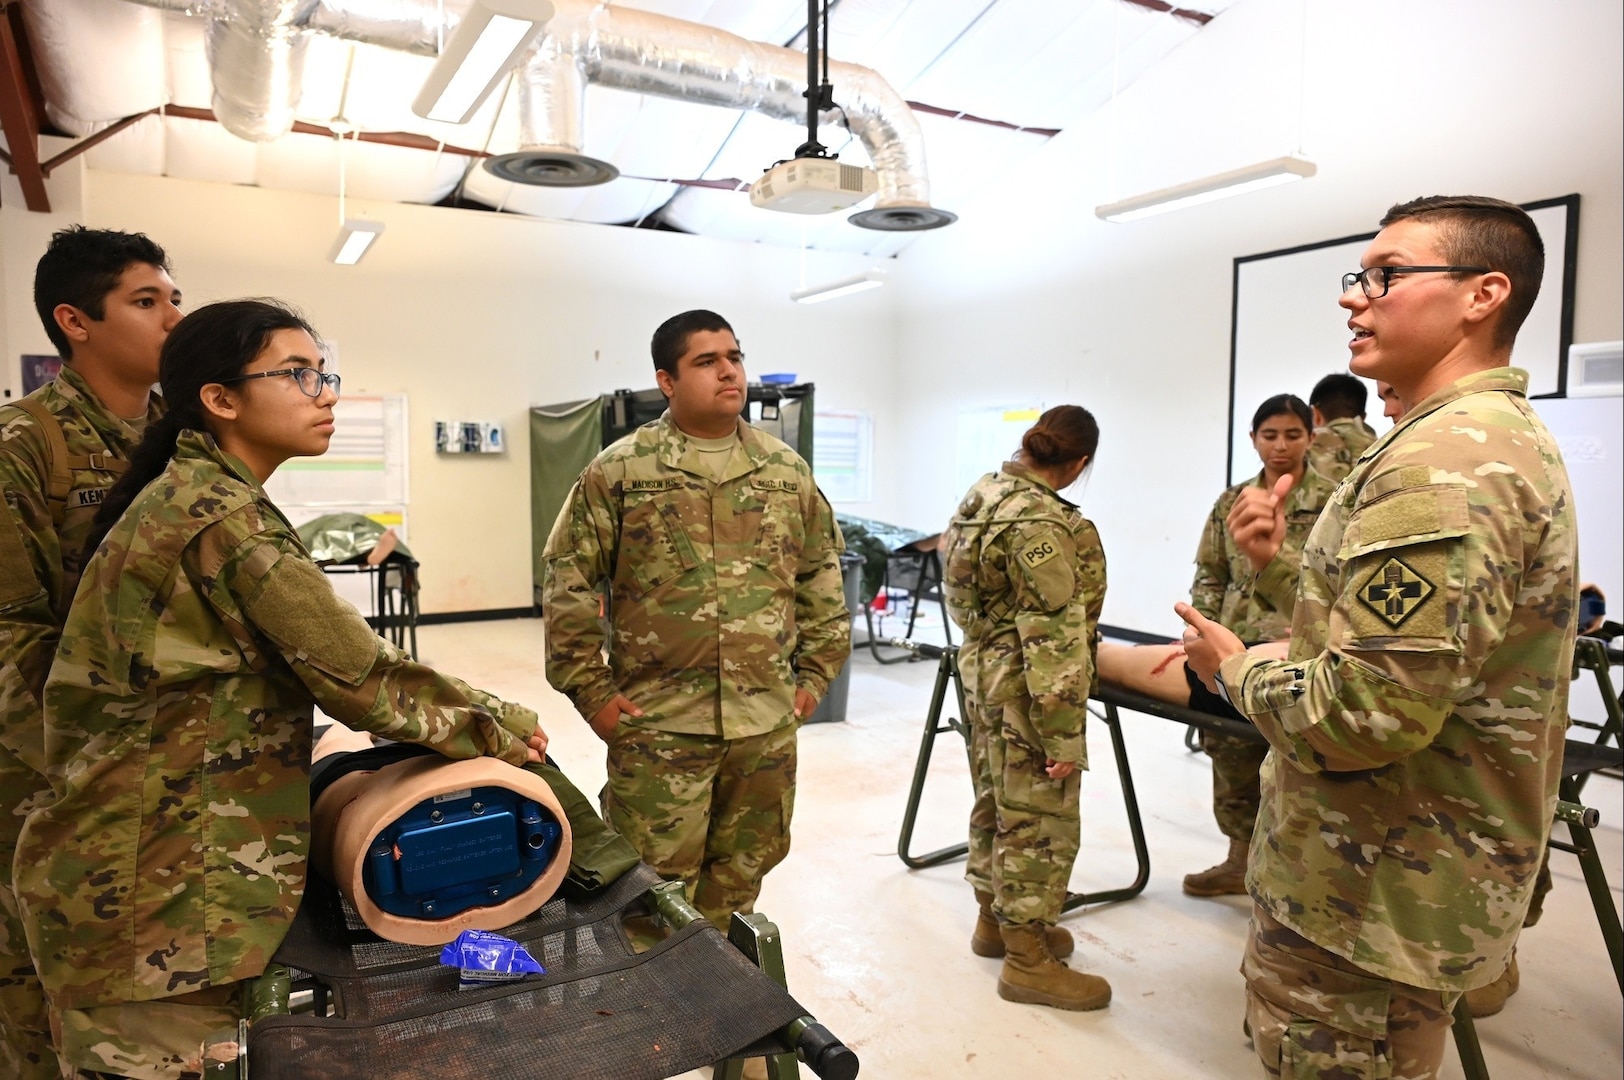 MEDCoE instructors, drill sergeants give cadets a glimpse of Army life